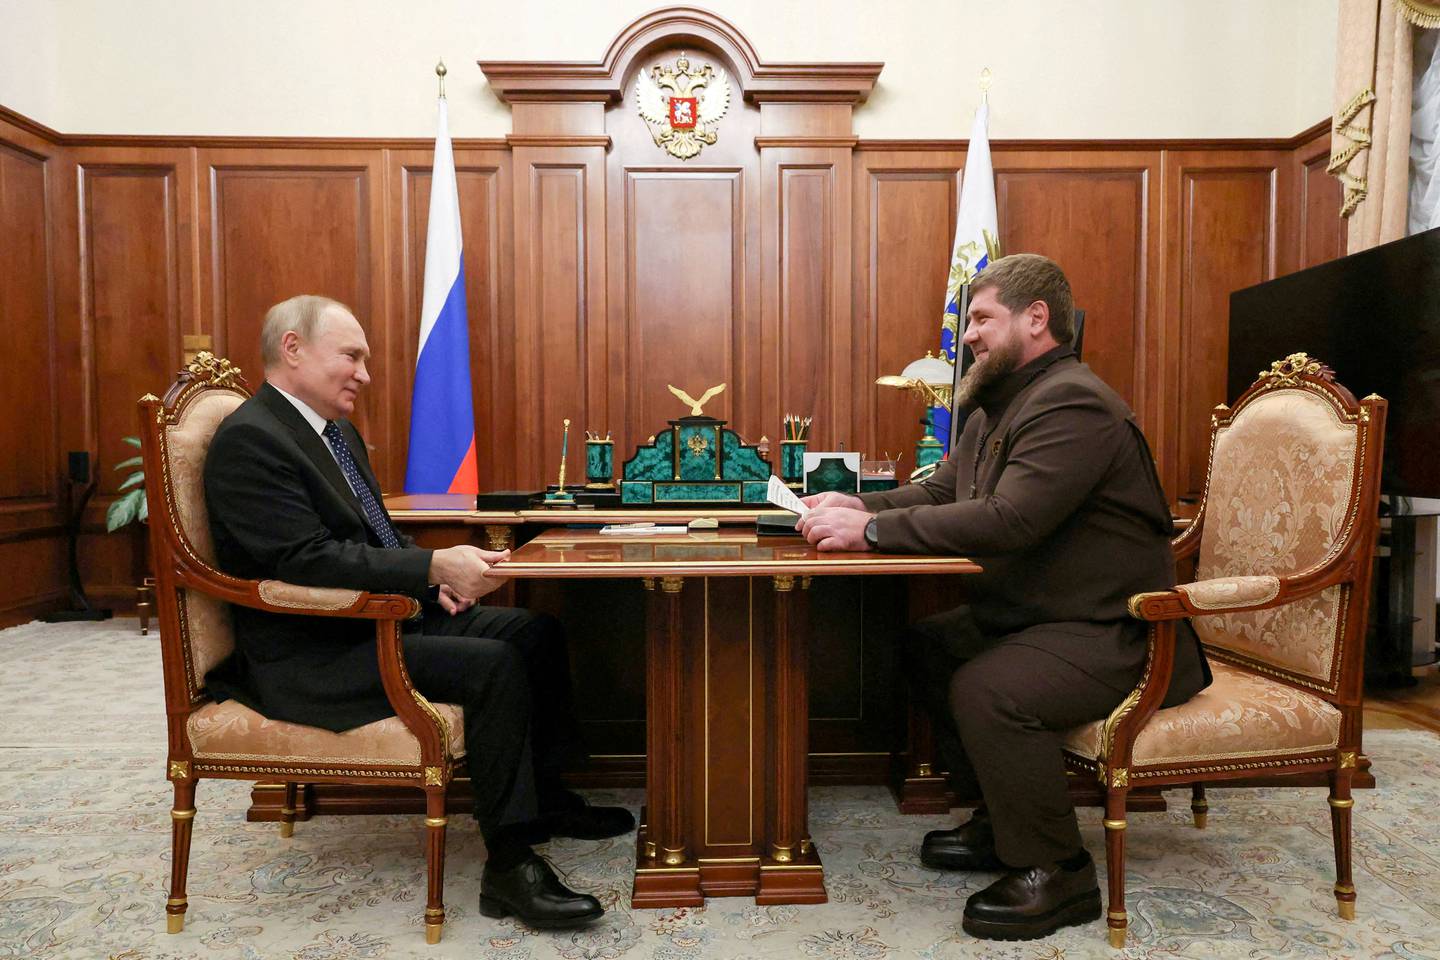 FILE PHOTO: Russia's President Vladimir Putin meets Head of the Chechen Republic Ramzan Kadyrov in Moscow, Russia March 13, 2023. Sputnik/Mikhail Klimentyev/Kremlin via REUTERS ATTENTION EDITORS - THIS IMAGE WAS PROVIDED BY A THIRD PARTY./File Photo